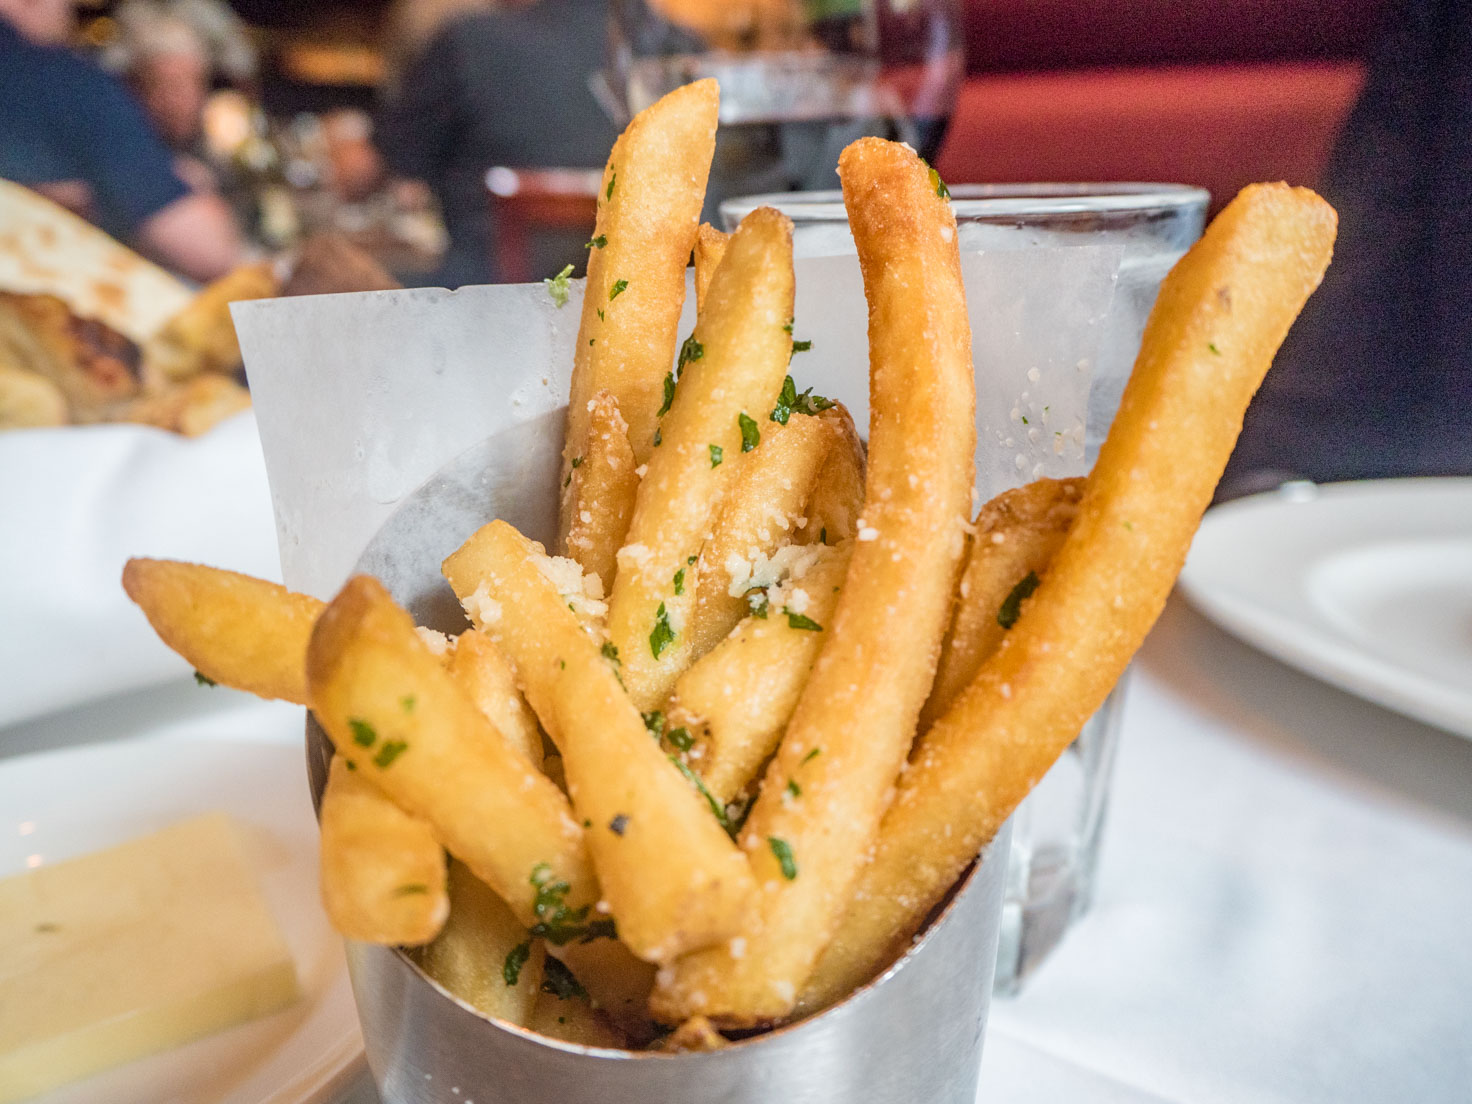 Parmesan and truffle fries at Capital Grille Chicago downtown